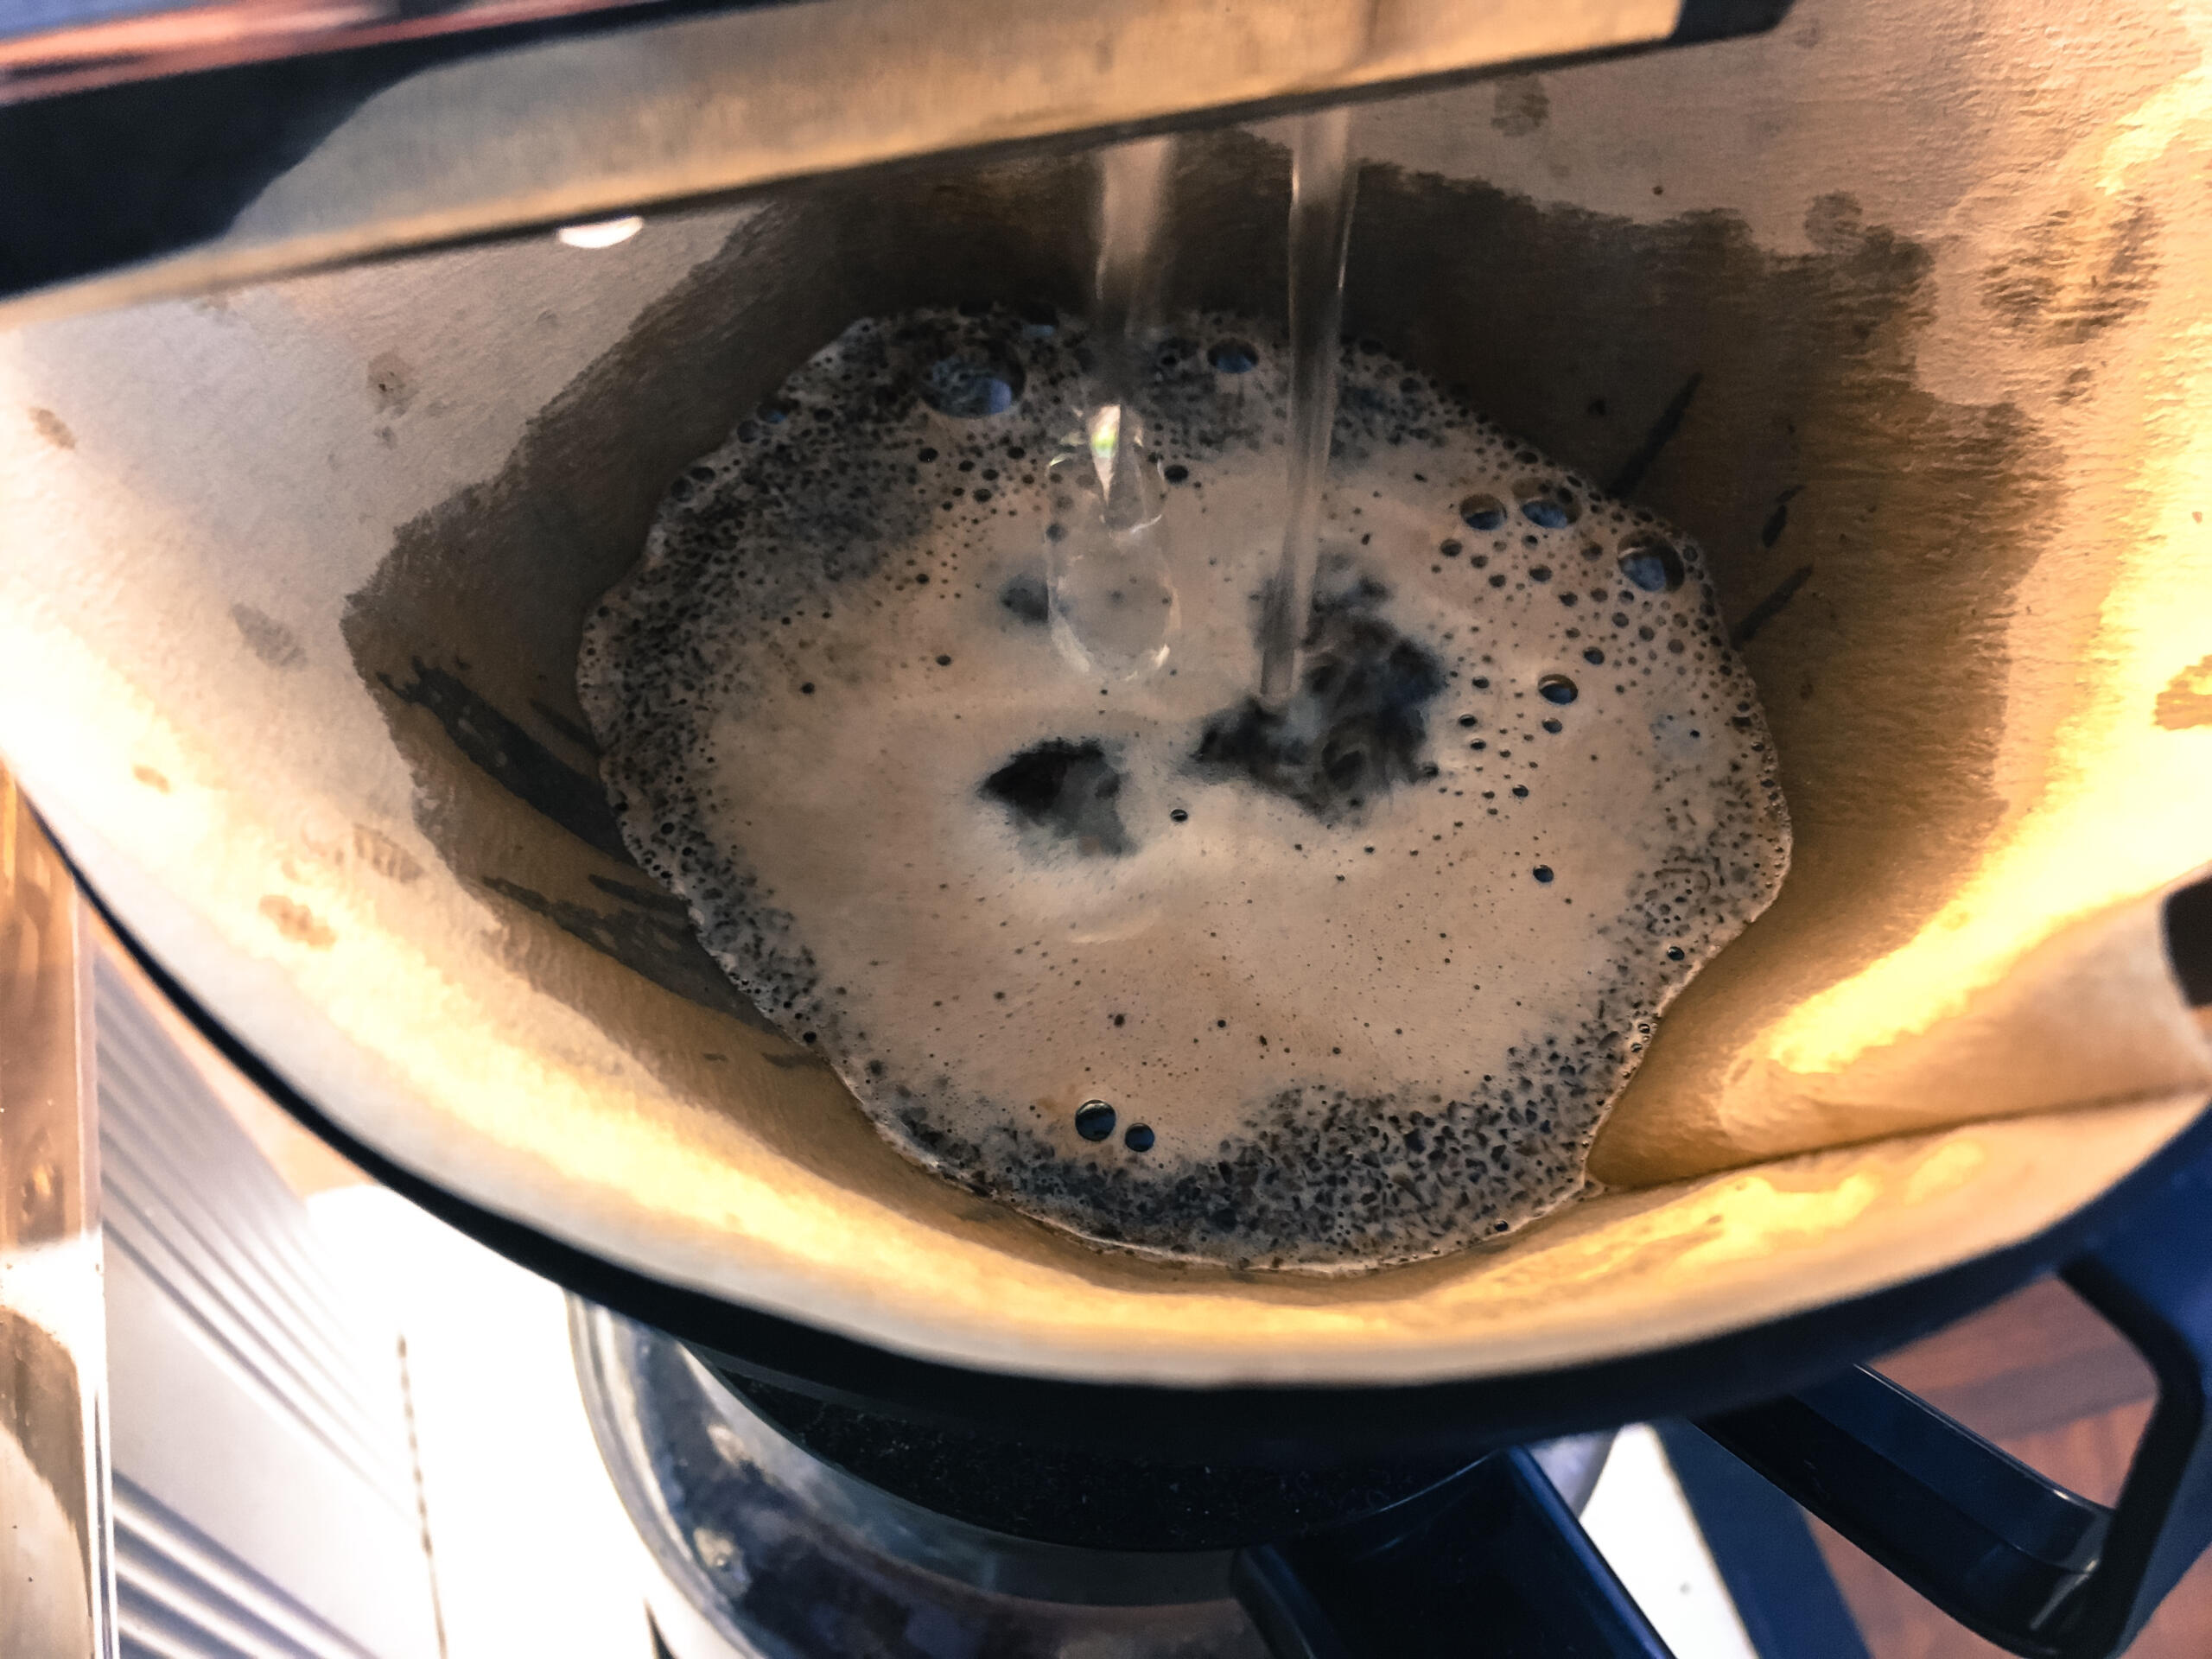 How Much Water Evaporates When Making Coffee?